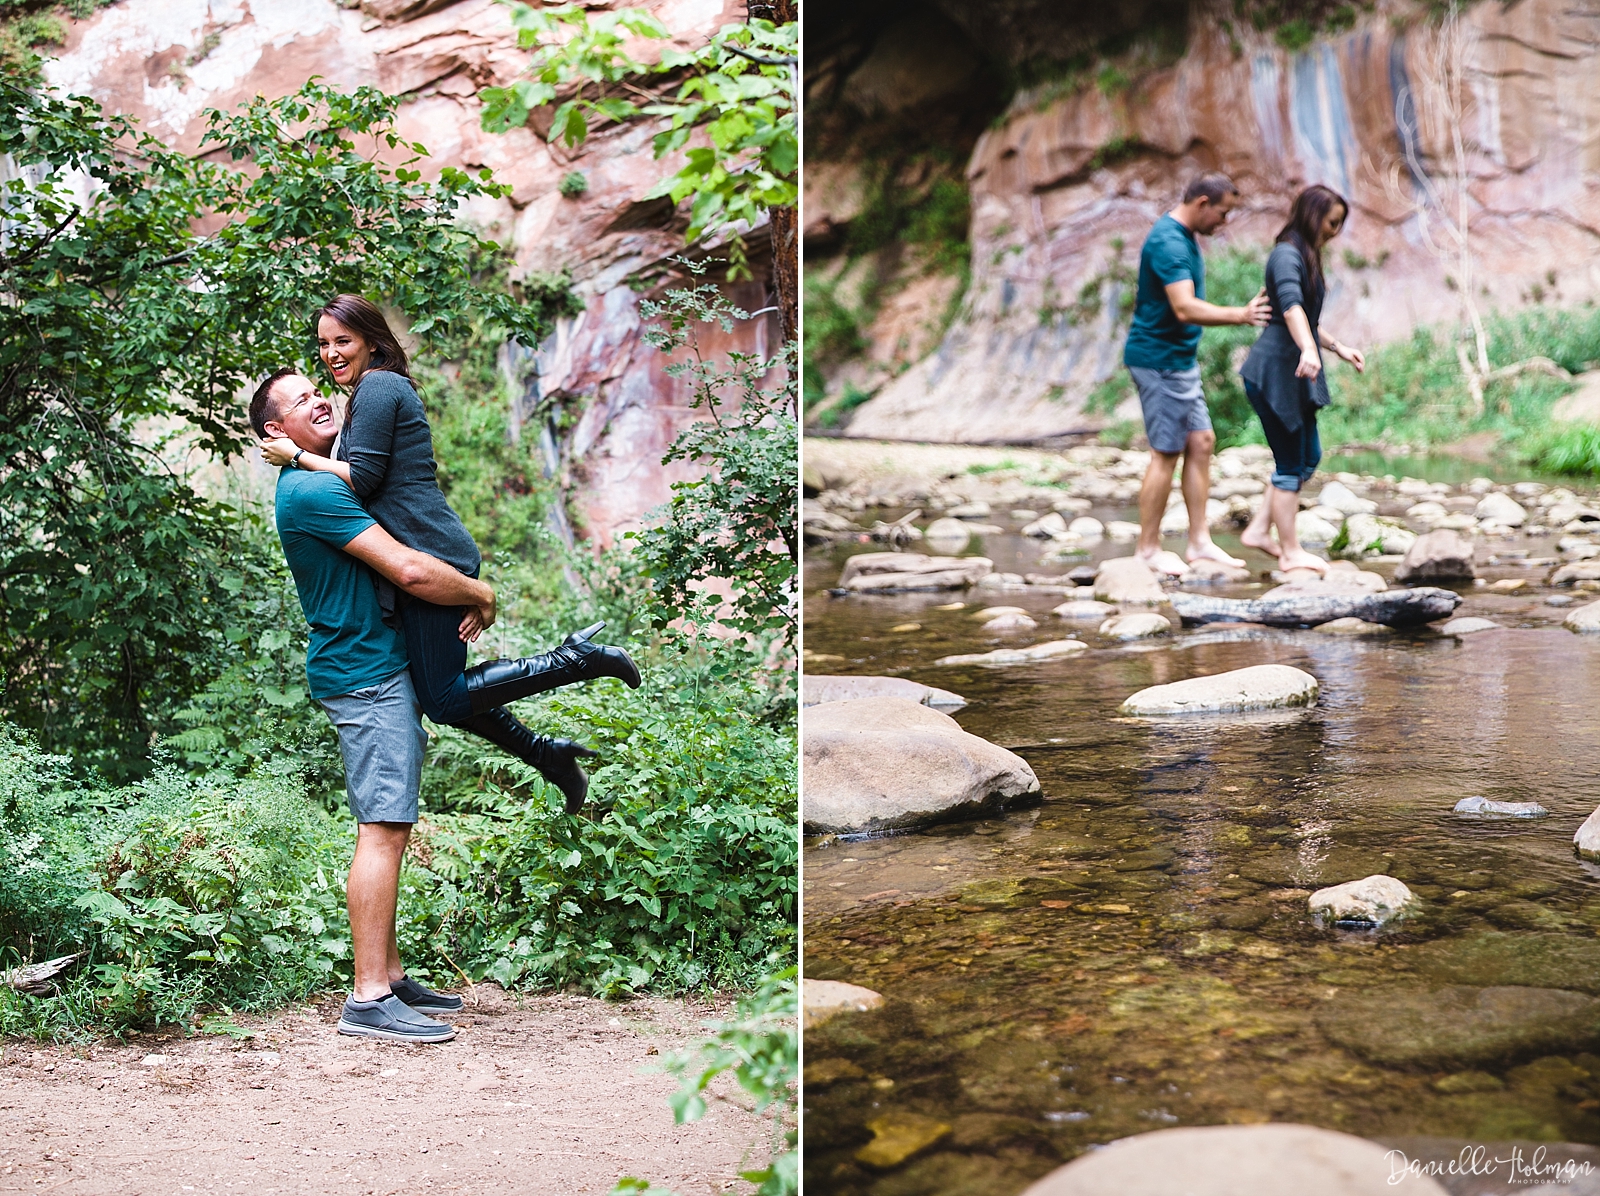 He is lifting her up next to Oak Creek with red canyon walls in the back